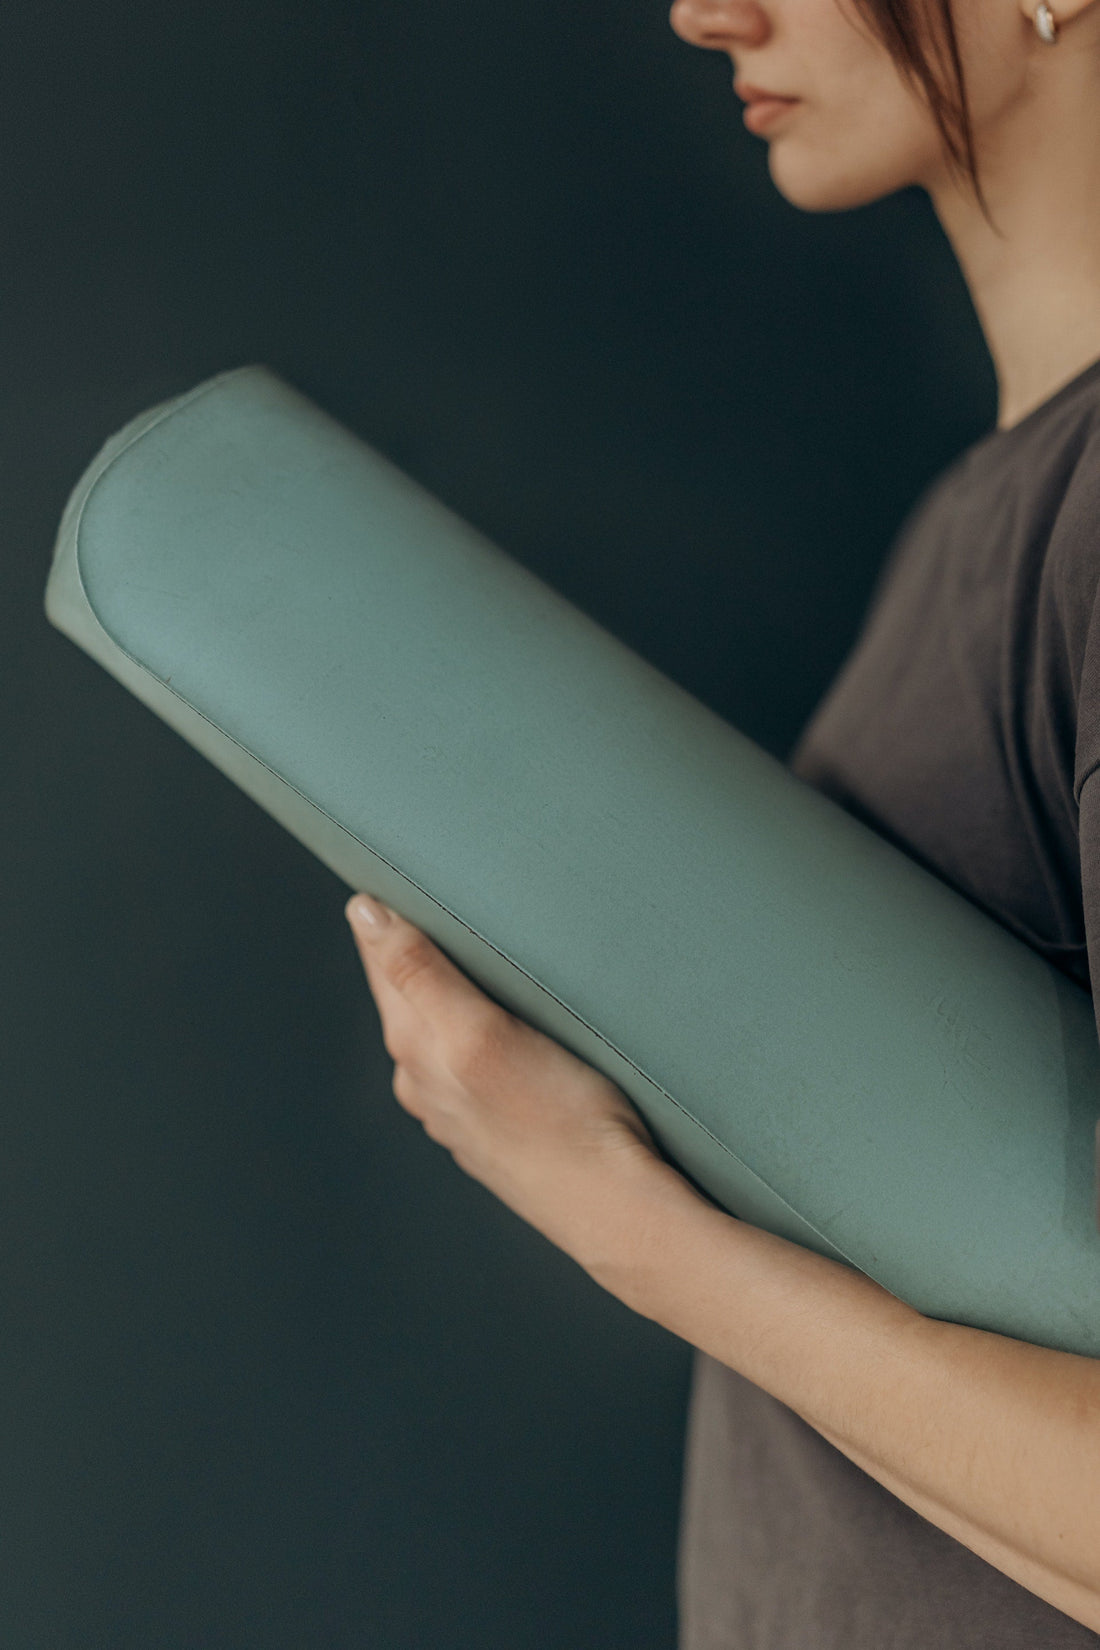 The Best Yoga Mats for Your Daily Routine - Linions